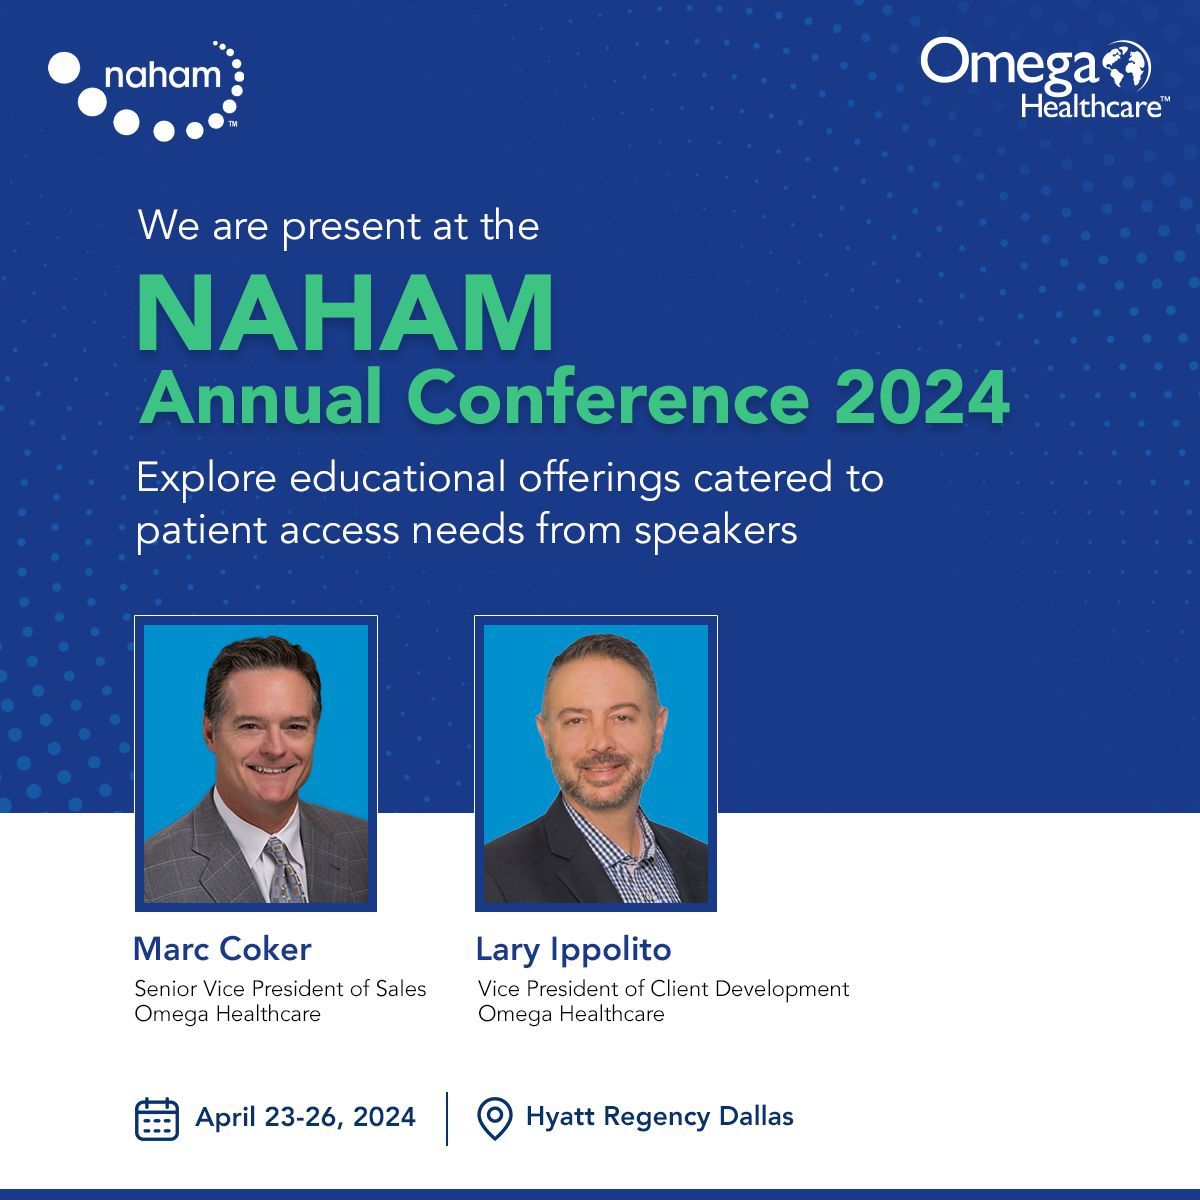 Join us at #NAHAM2024 in Dallas, Texas for insights and networking opportunities with #PatientAccess leaders nationwide. We’ll discuss staffing strategies, prior authorization trends, and leadership challenges.

#Healthcare #MedicalStaffing #HealthcareLeadership